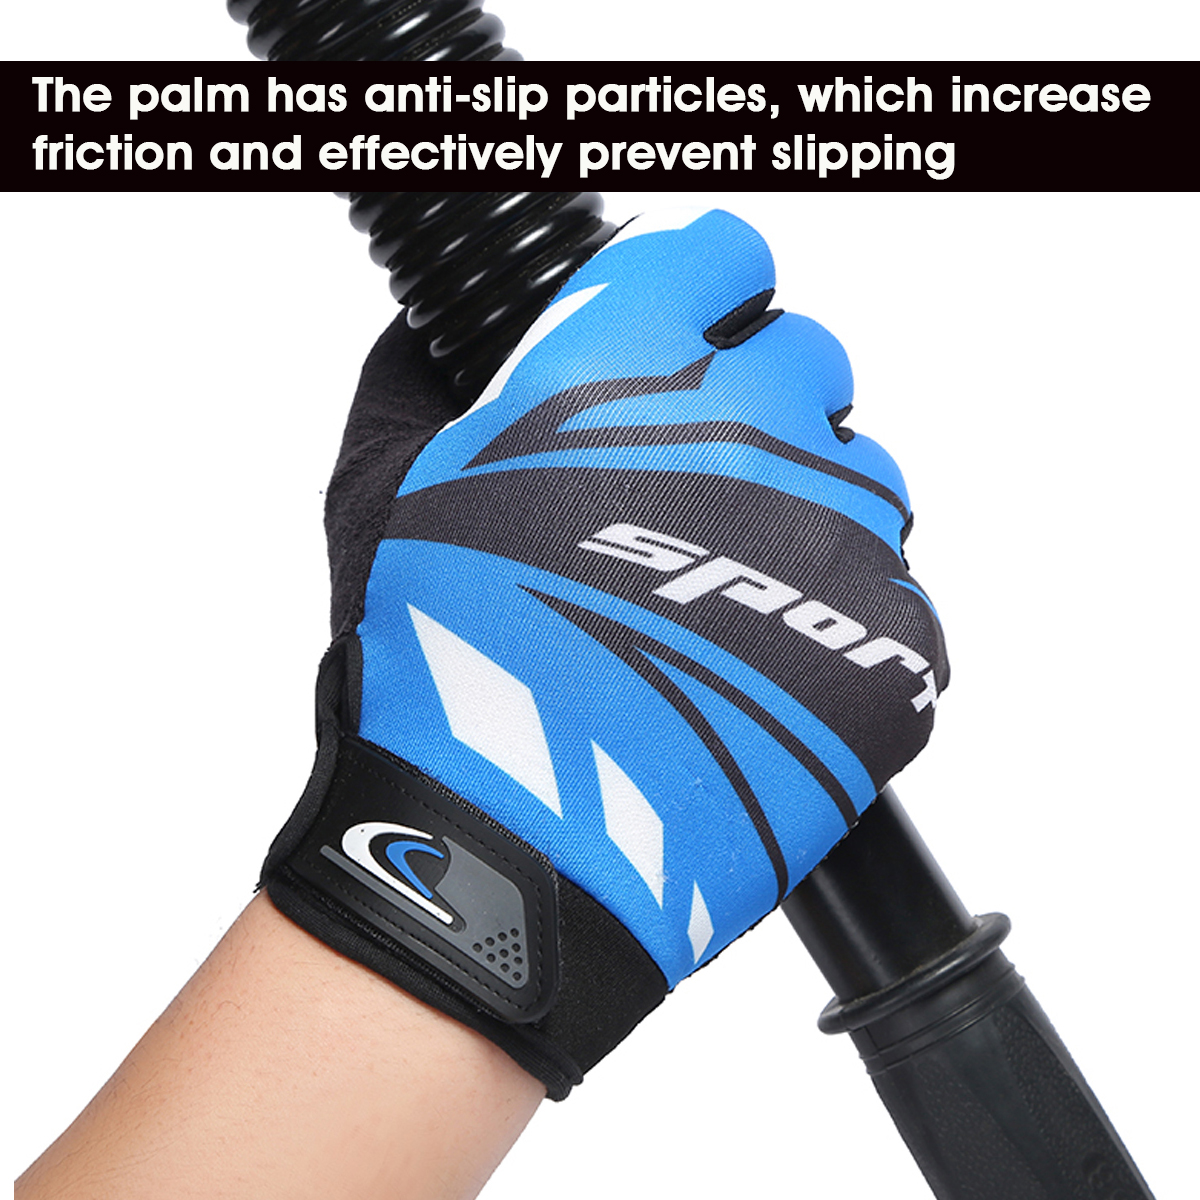 Windproof-Touch-Screen-Gloves-Breathable-Warm-Full-Finger-Gloves-Winter-Warmer-for-Outdoor-Riding-Mo-1602930-4